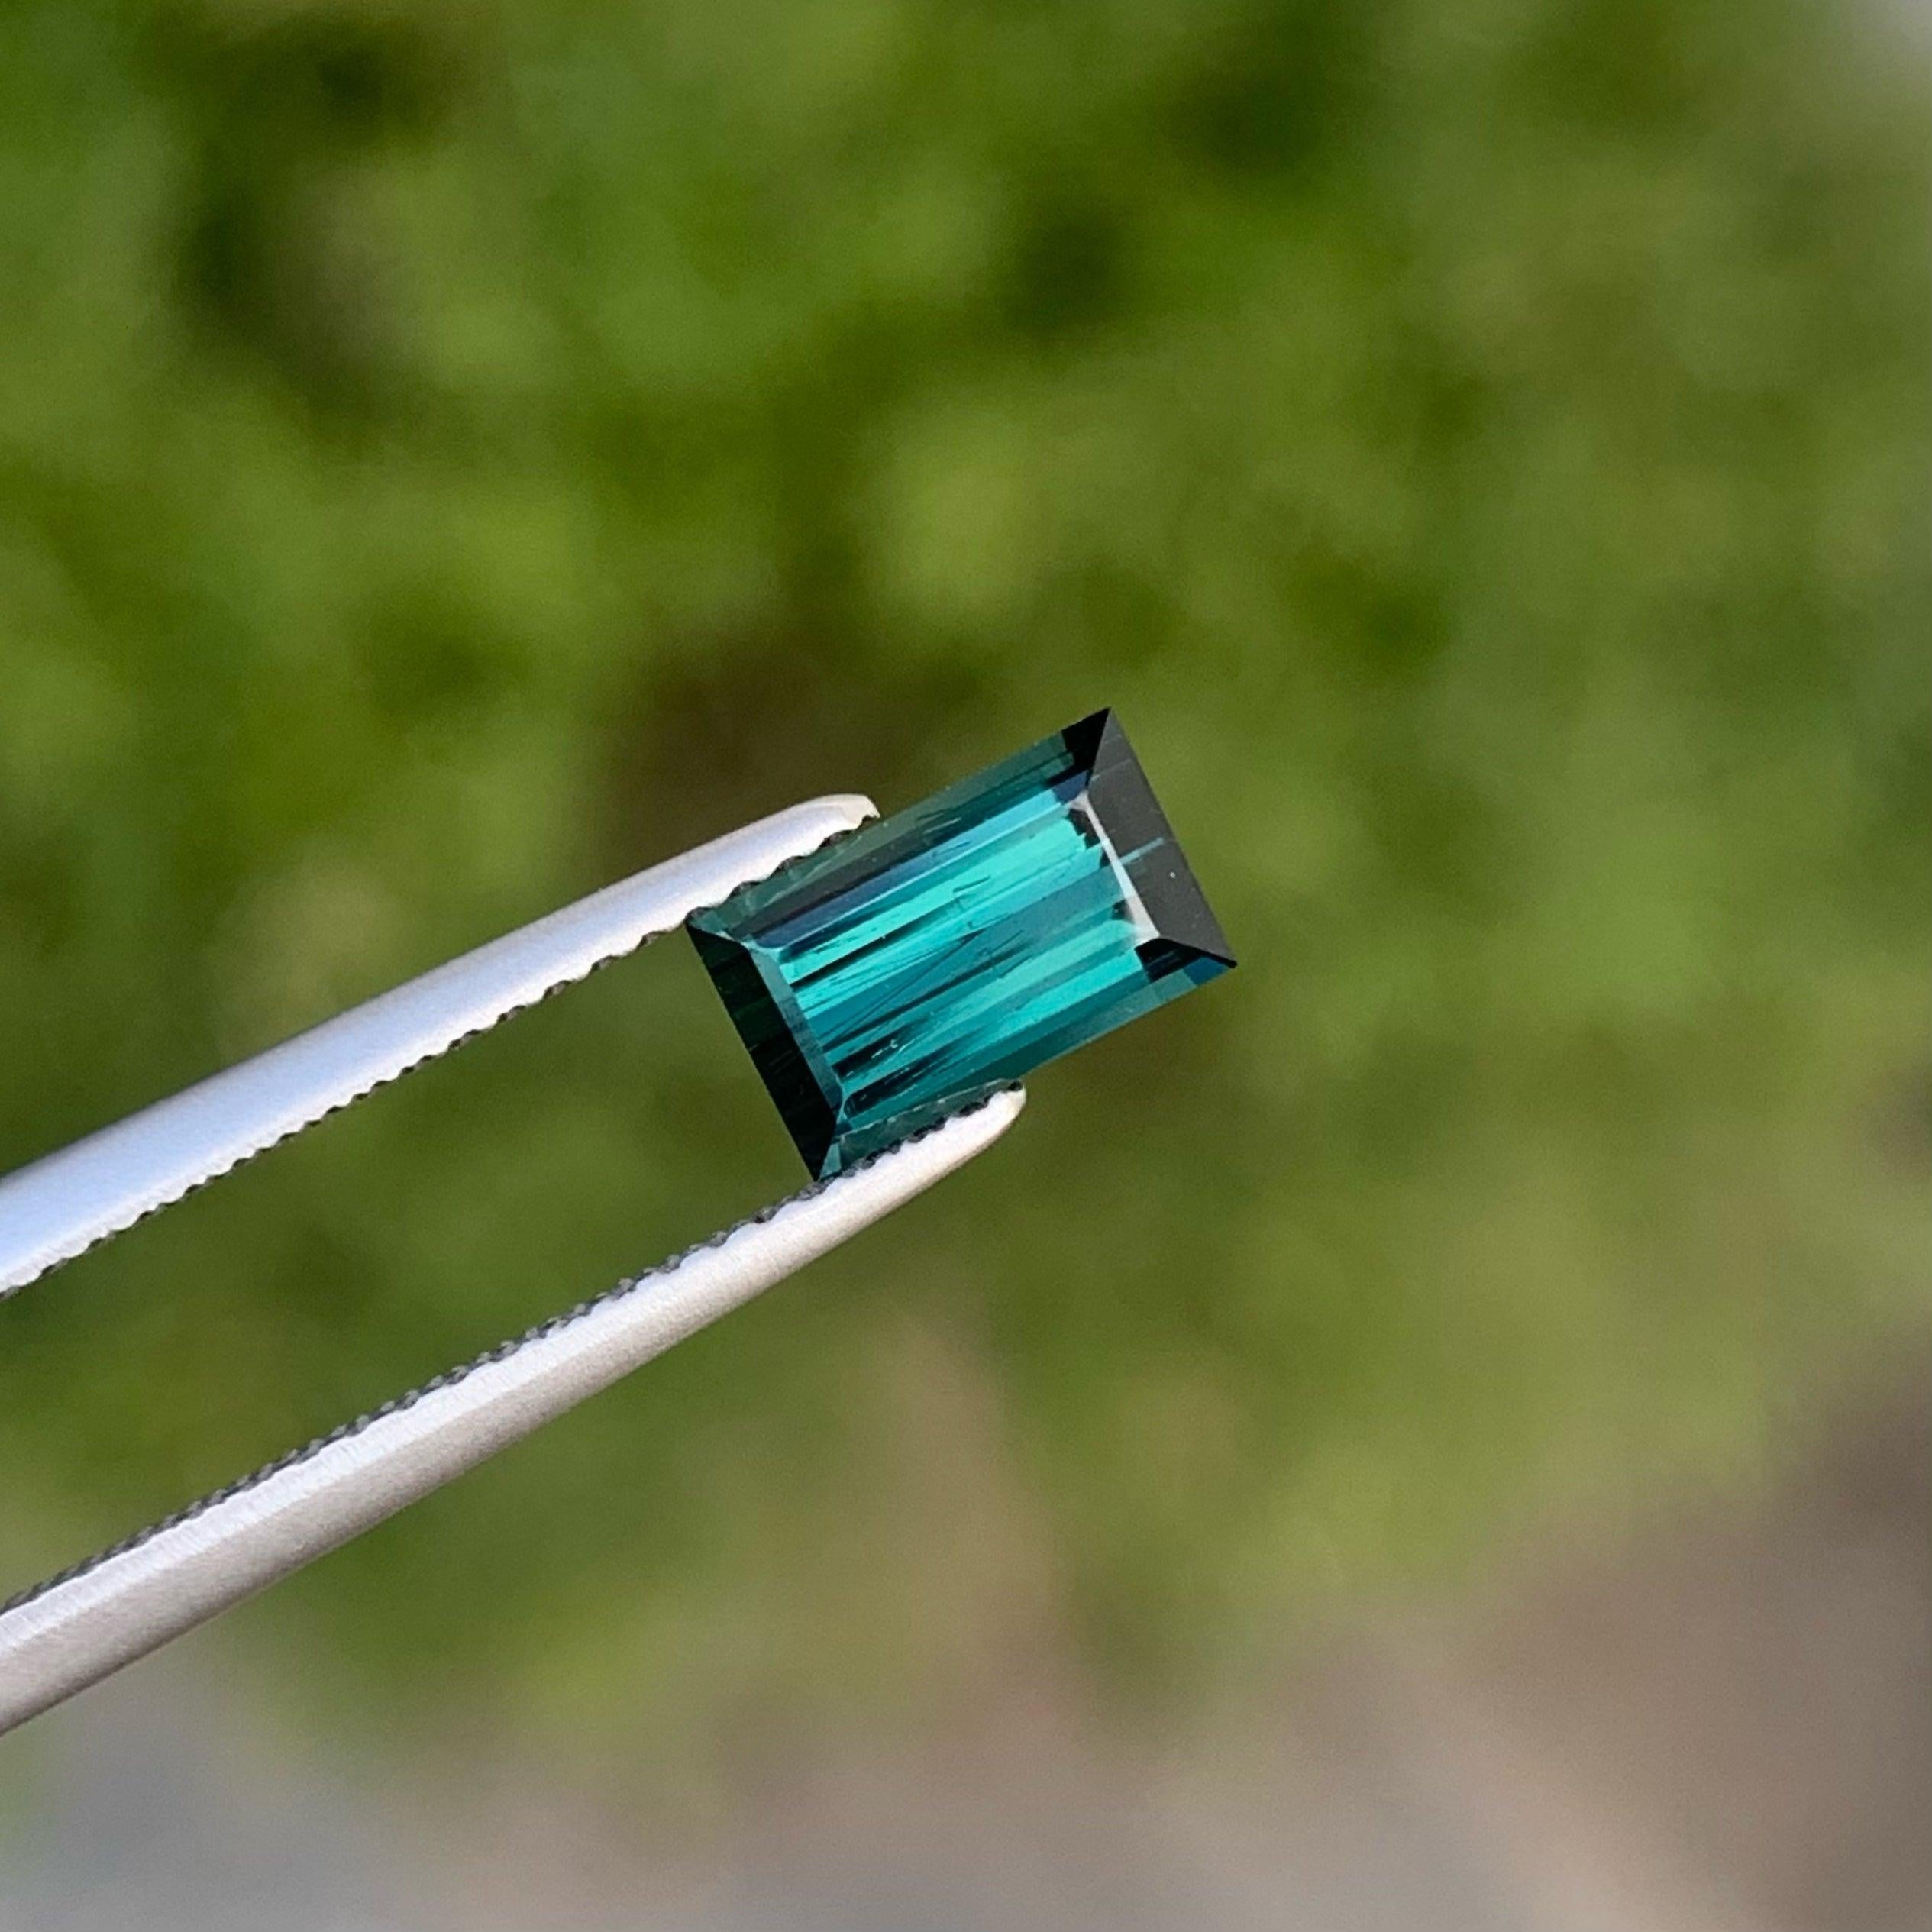 Gorgeous Indicolite Tourmaline Loose Gemstone, Available For Sale At Wholesale Price Natural High Quality 1.15 Carats Eye Clean Clarity Natural Tourmaline From Afghanistan.

Product Information:
GEMSTONE TYPE:	Gorgeous Indicolite Tourmaline Loose